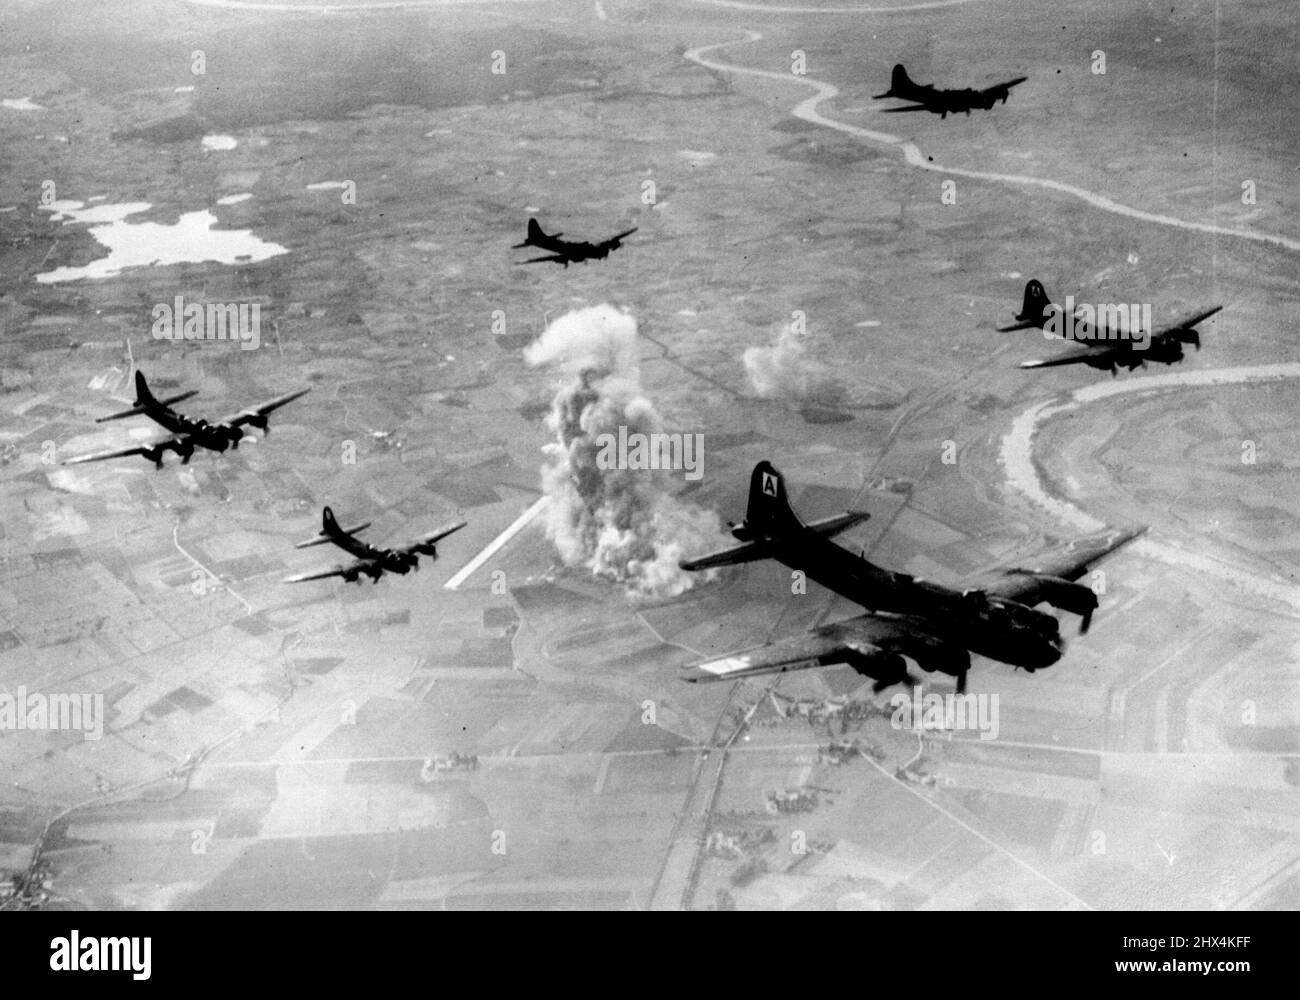 Forts Record Trip Wrecks F.W - 190 Factory -- Smoke and flame from the wrecked factory soar high as the Fortresses turn from the target and start the long journey home. Apparently secure in their belief that East Prussia was beyond the range of daylight bombers, German defences were caught napping Saturday October 9th., when Eighth Air Force Bomber Command Flying Fortresses attacked the huge Focke Wulf aircraft factory at Marienburg, south east of Danzig and 200 miles beyond Berlin. This plant covering more than 100 acres was believed to assemble approximately half of all FW-190 fighter planes Stock Photo